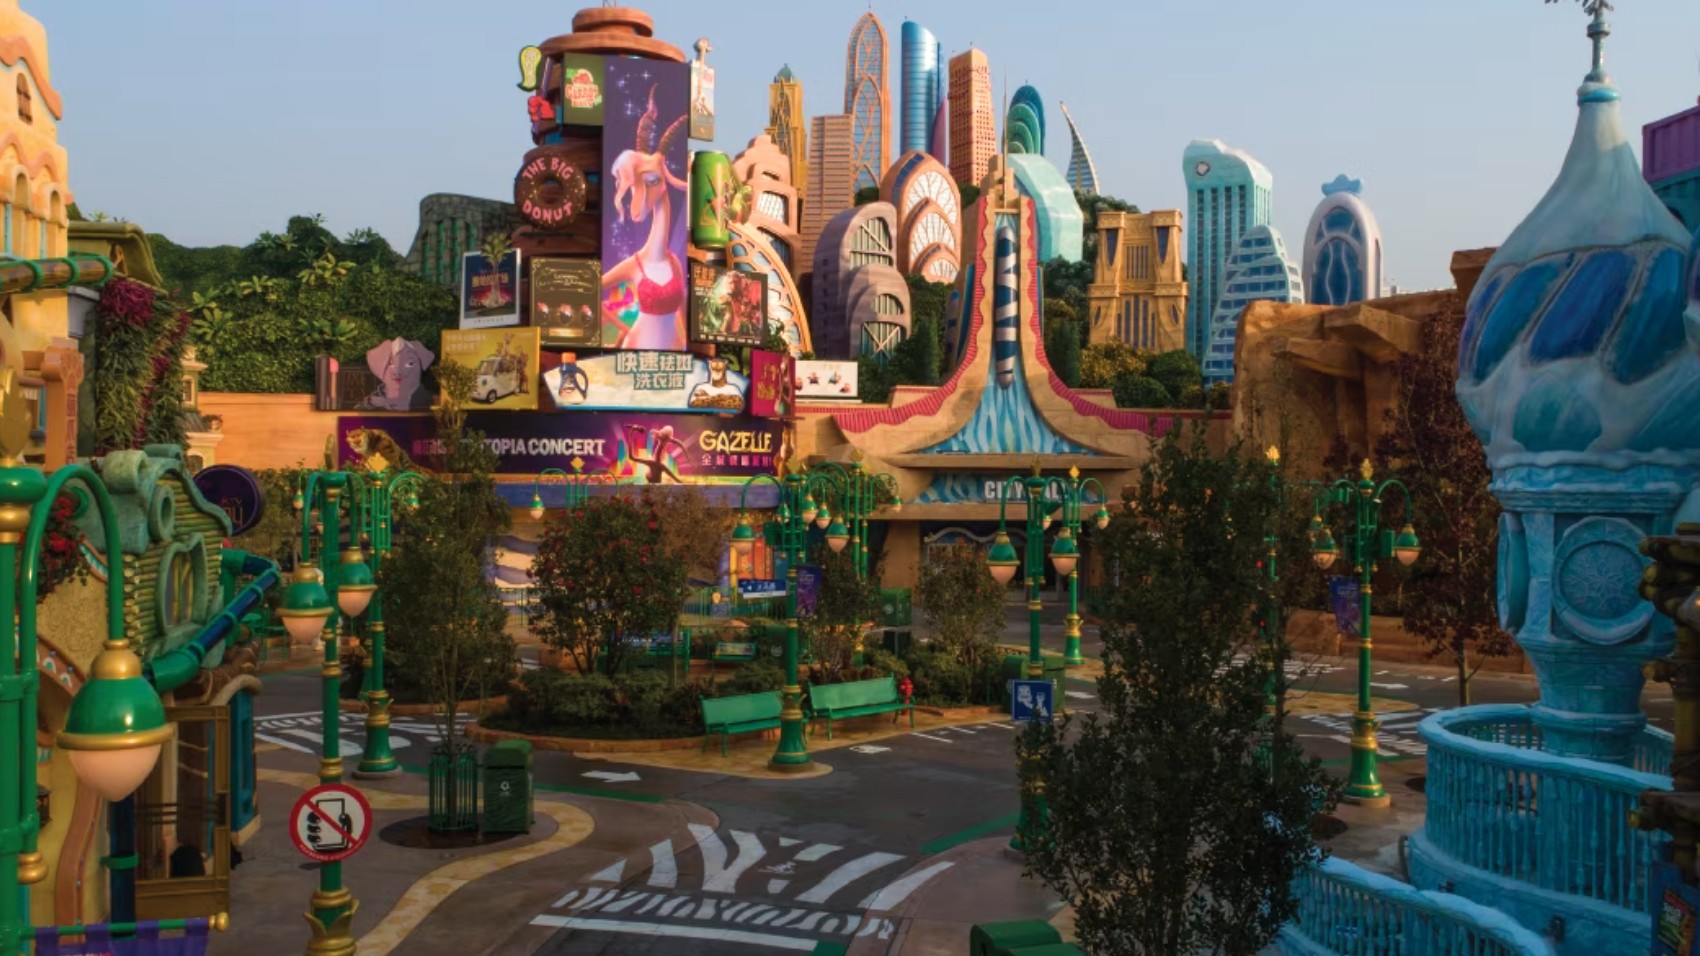 A street scene in the Zooptopia-themed land at Shanghai Disneyland. (Courtesy of Disney)